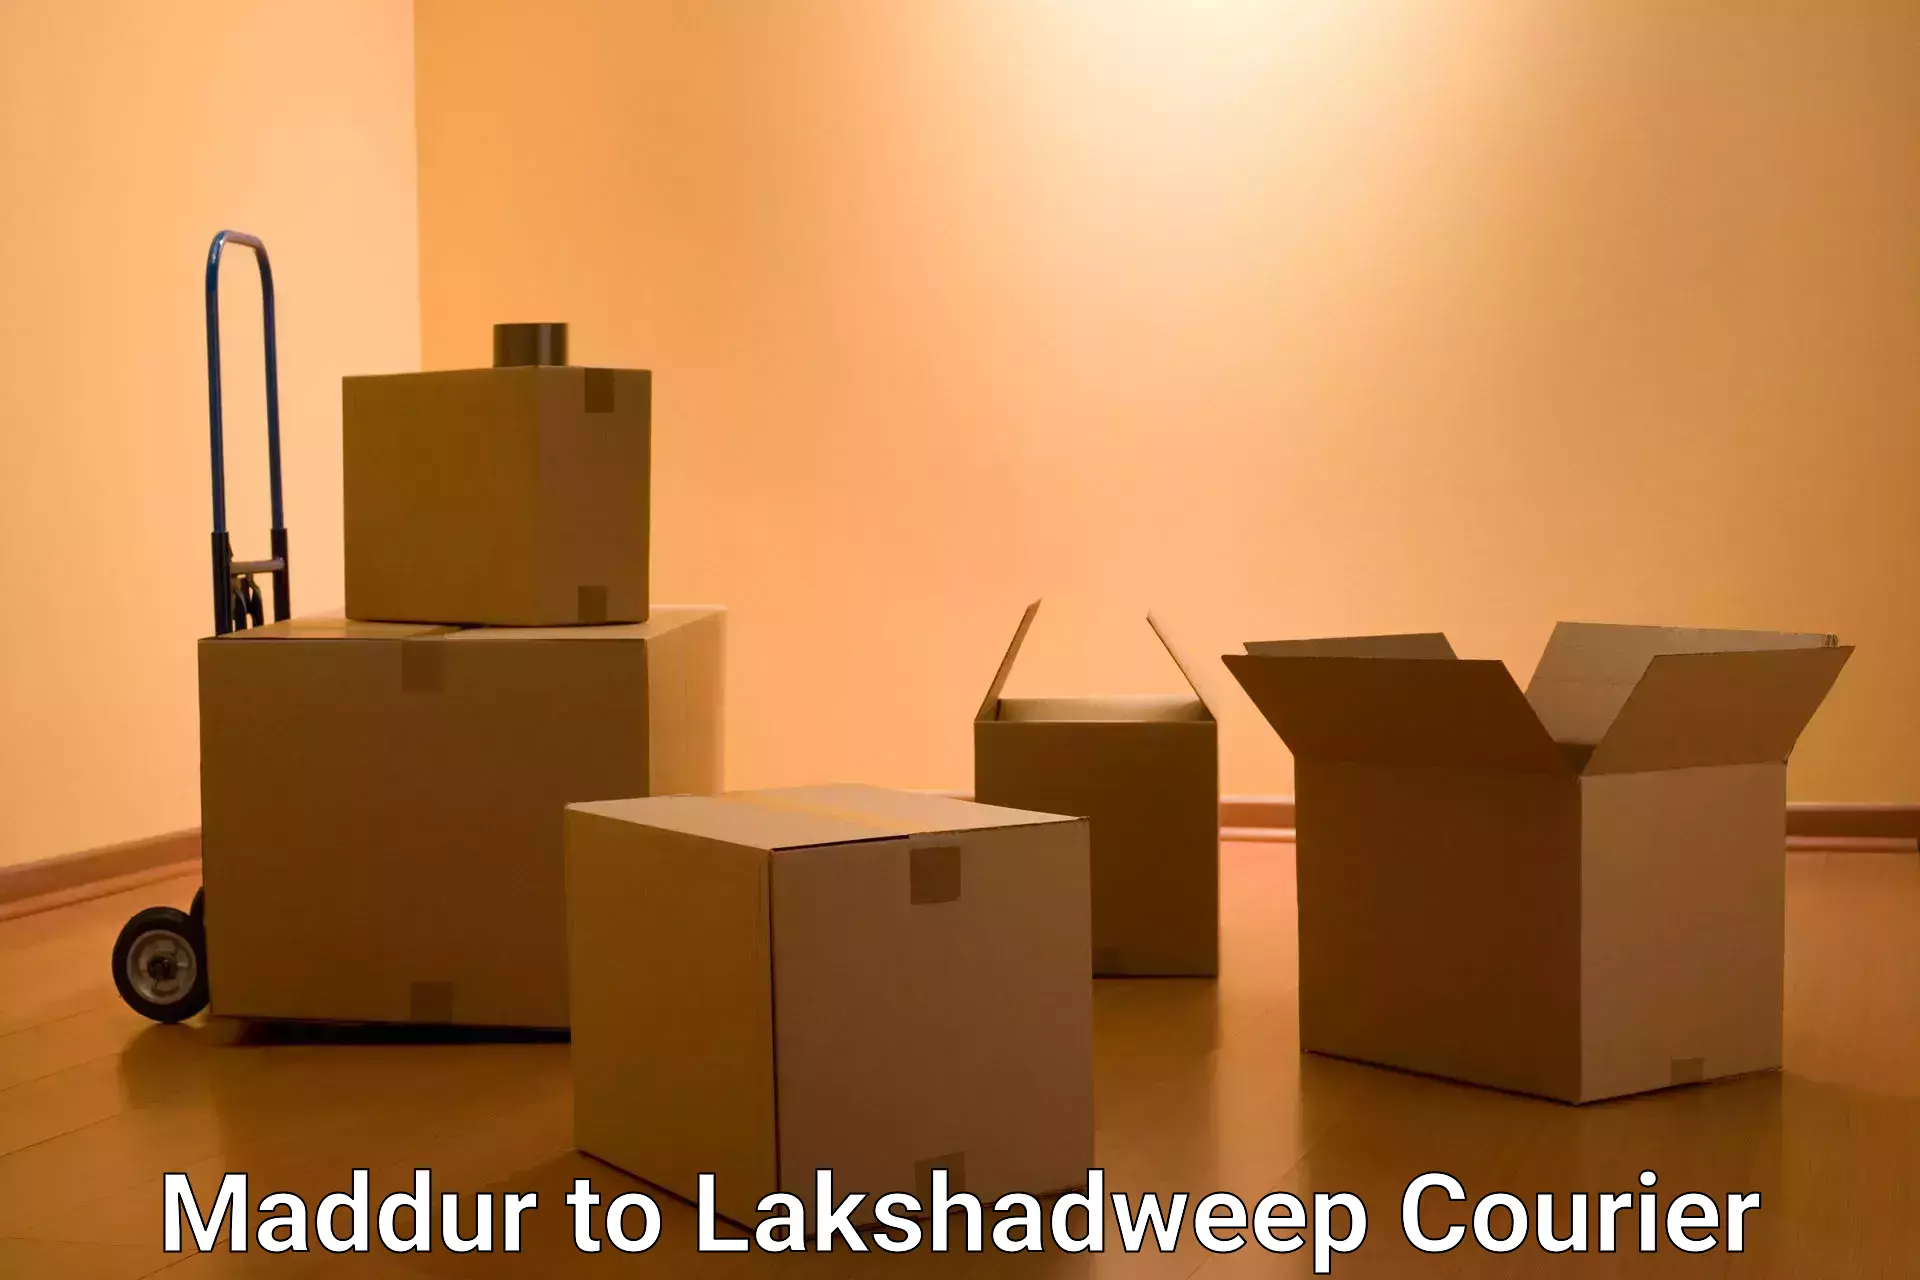 Quality courier services Maddur to Lakshadweep